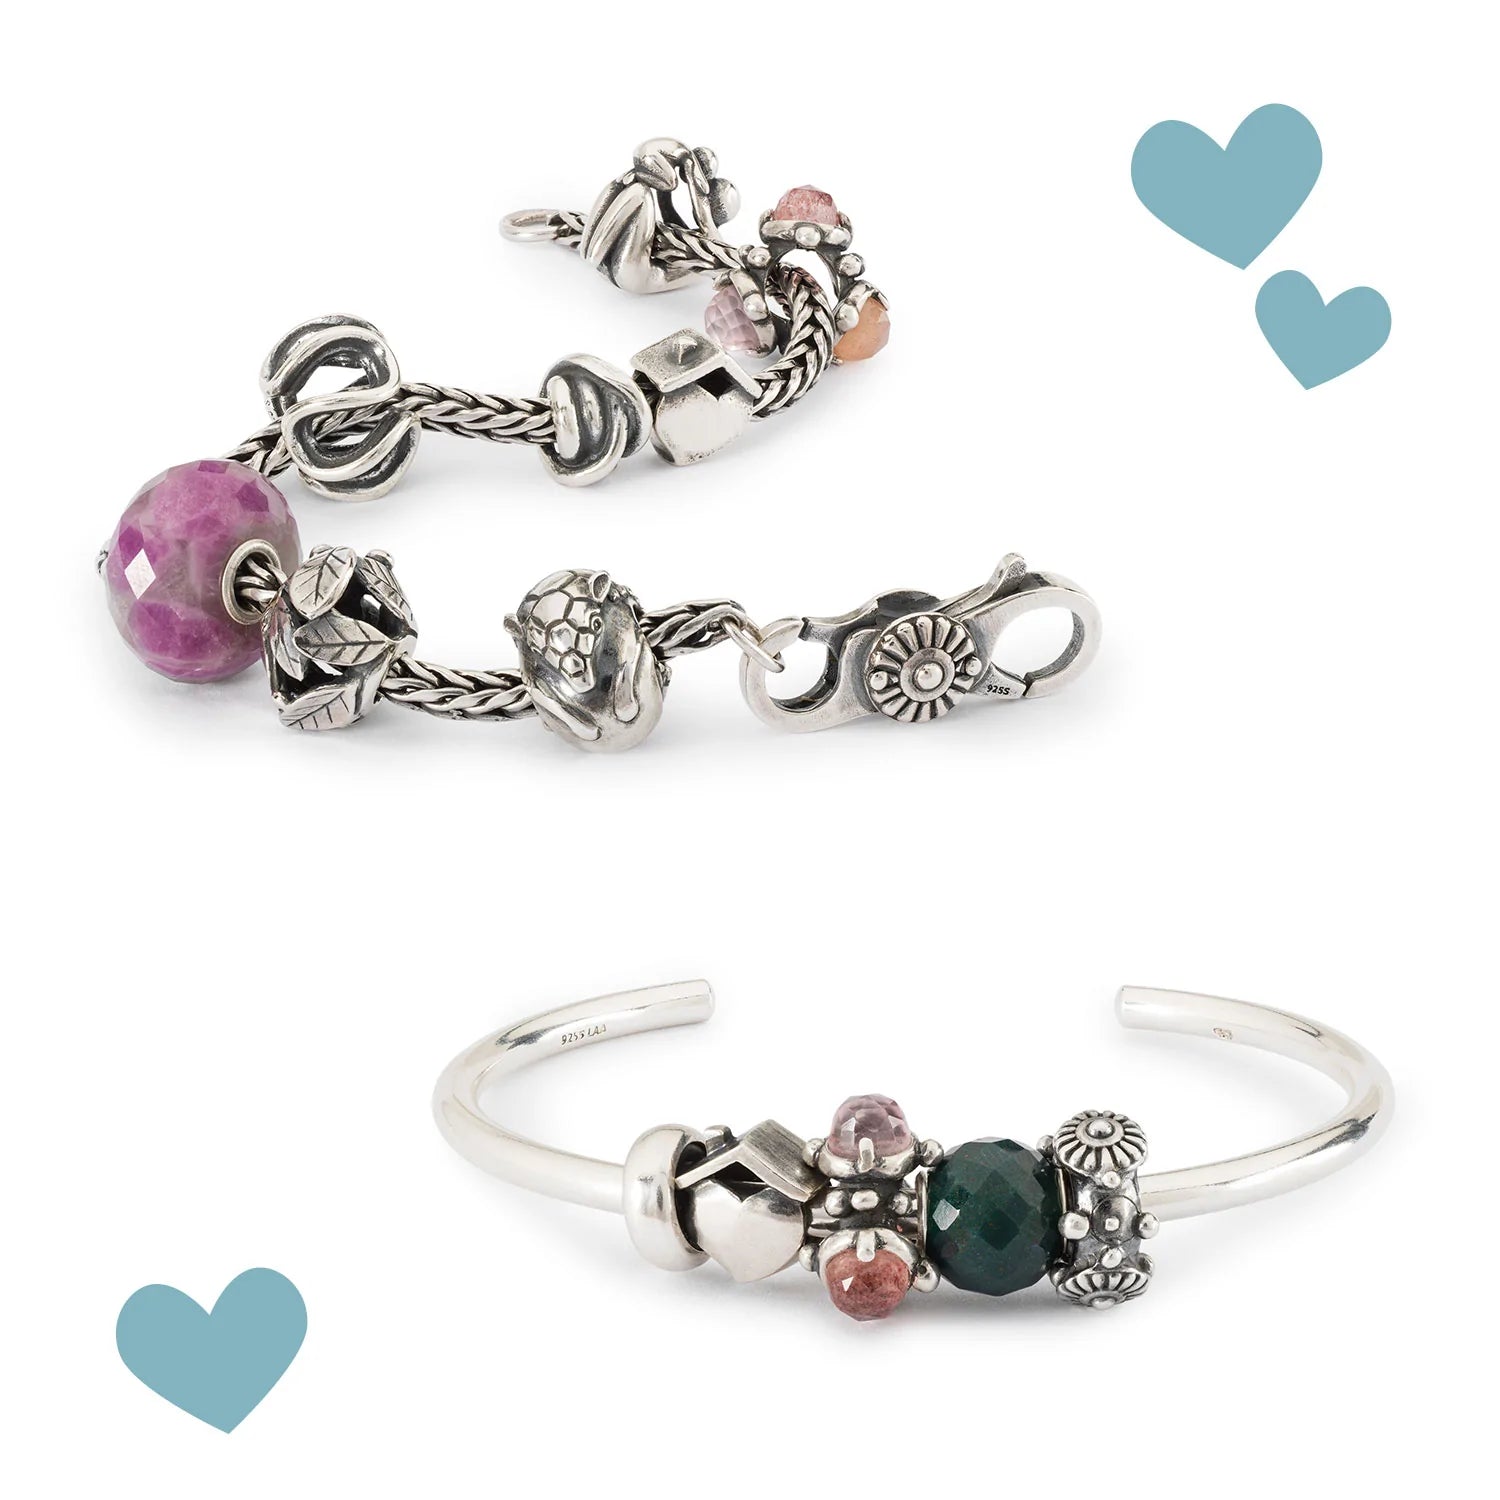 Trollbeads bangle and foxtail bracelet with beads in gemstone, silver and glass